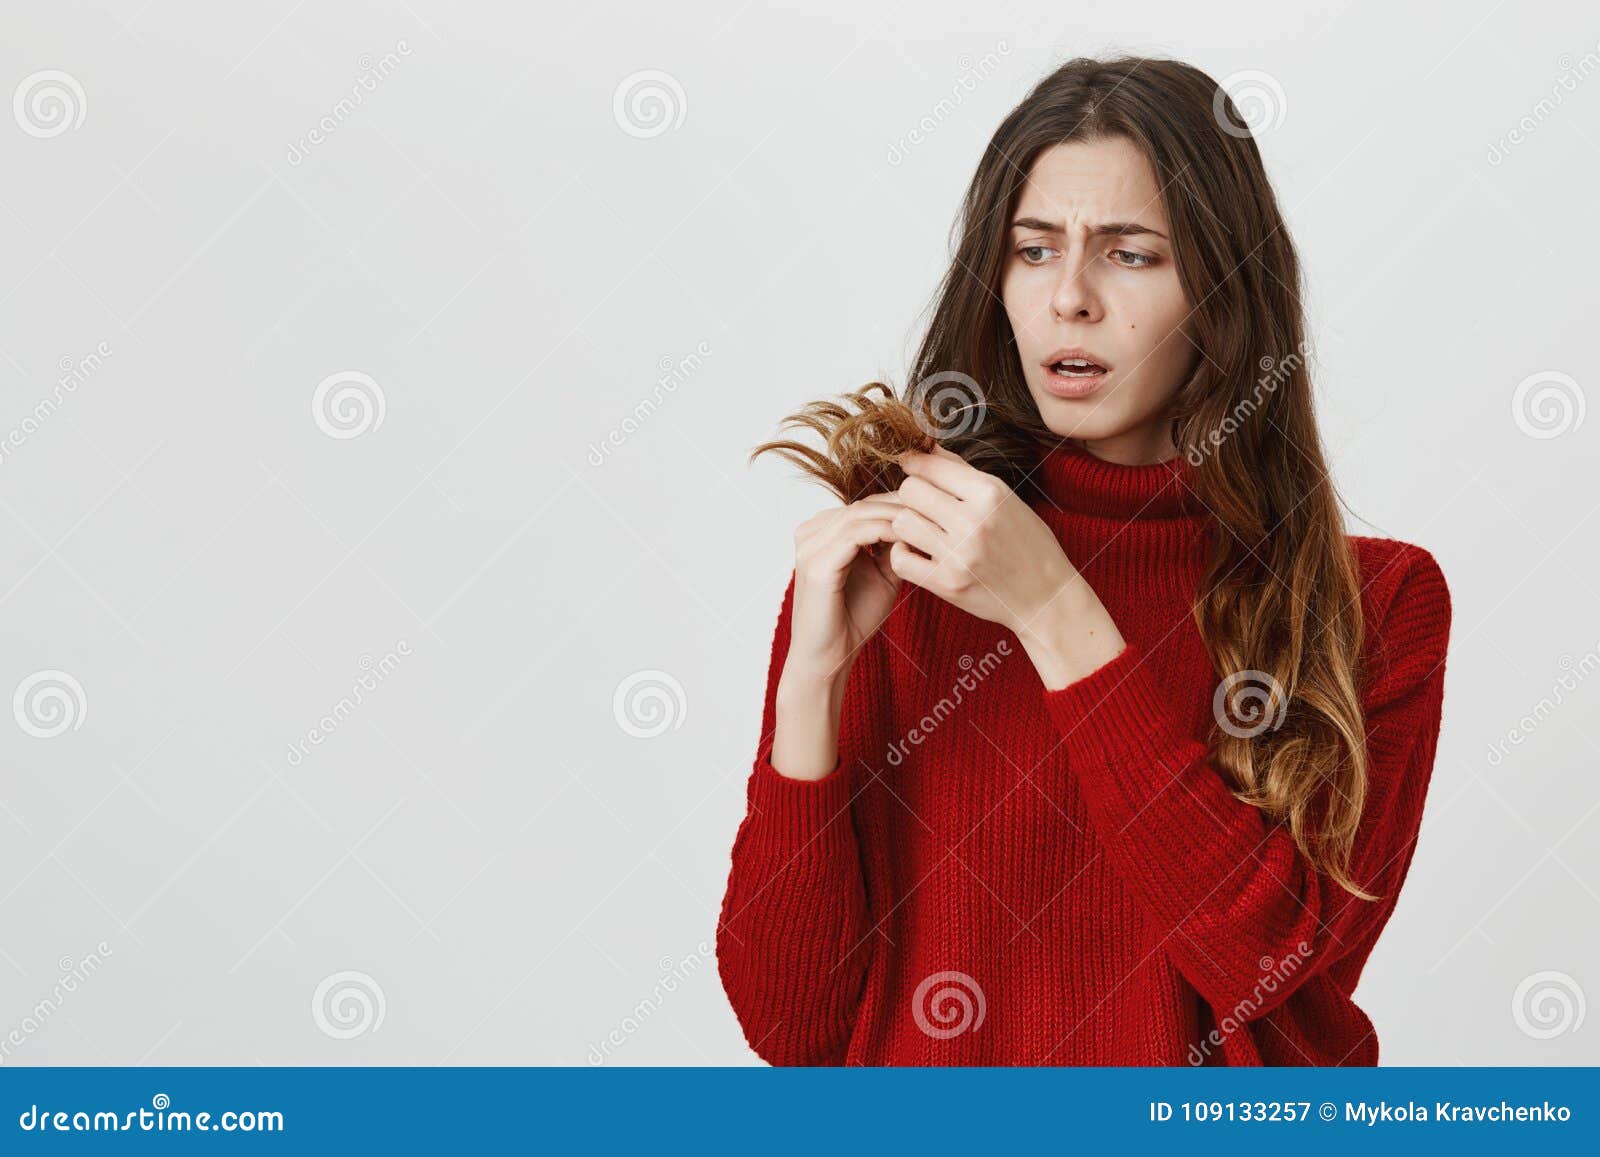 Stunned 40s Woman Showing Her Emphasized Strength Stock Photo ...